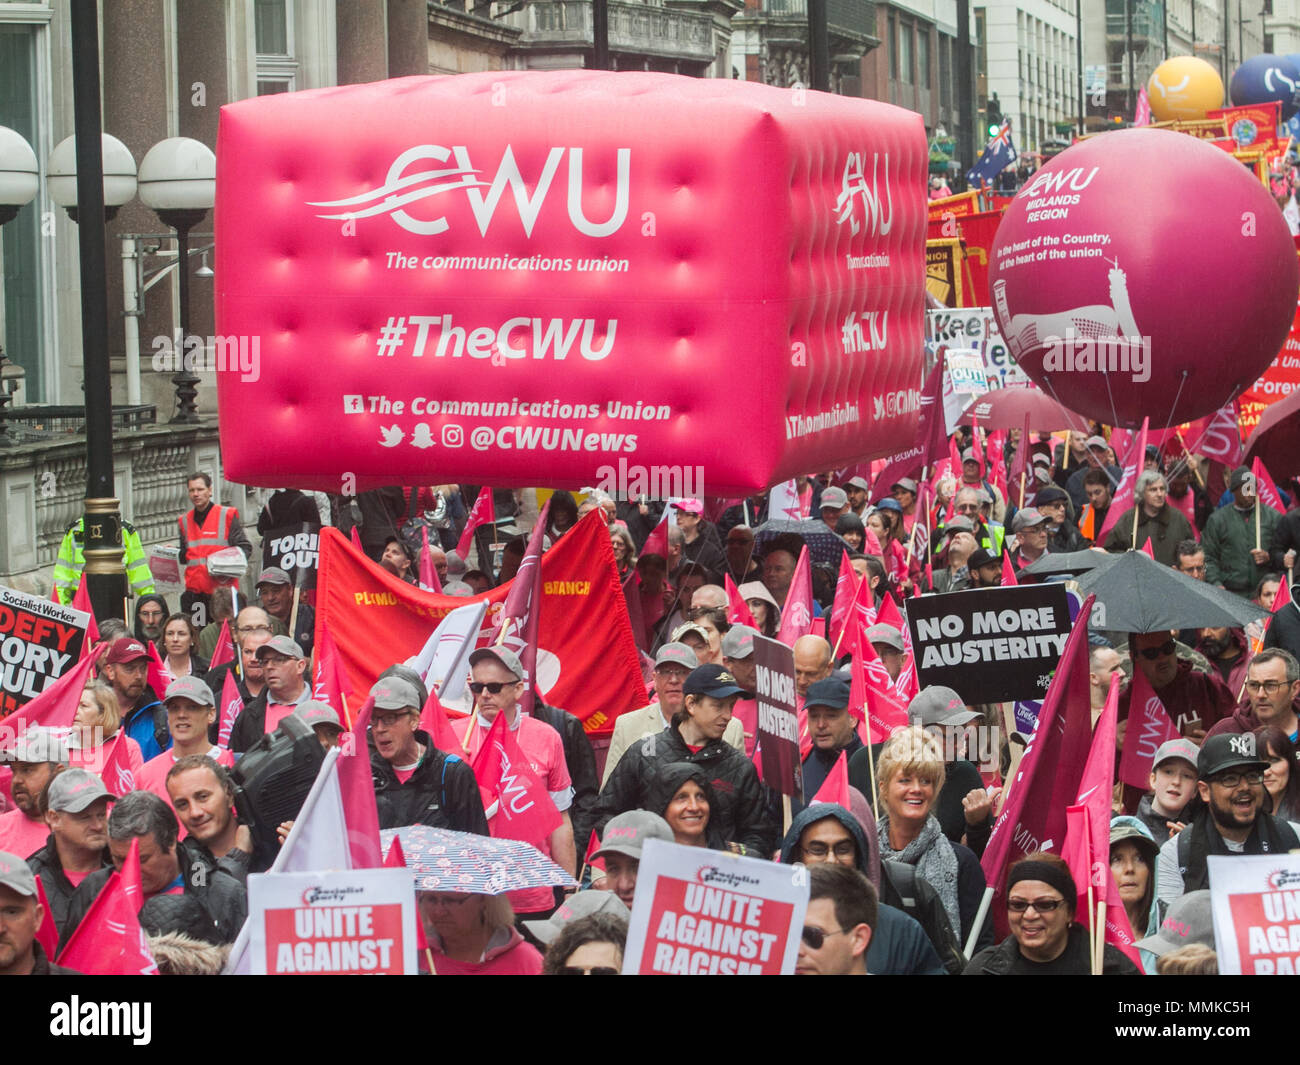 London UK. 12th May 2018. Thousands of people, Union members, peace campaigners and politicians marched  through central London  led by the TUC Trade Union Congress  with a theme 'New Deal for Working People'  calling for better pay, a higher minimum wage, a ban on zero-hours contracts and more funding for the NHS, education and an en to Conservative Tory spending cuts.Credit: amer ghazzal/Alamy Live News Stock Photo